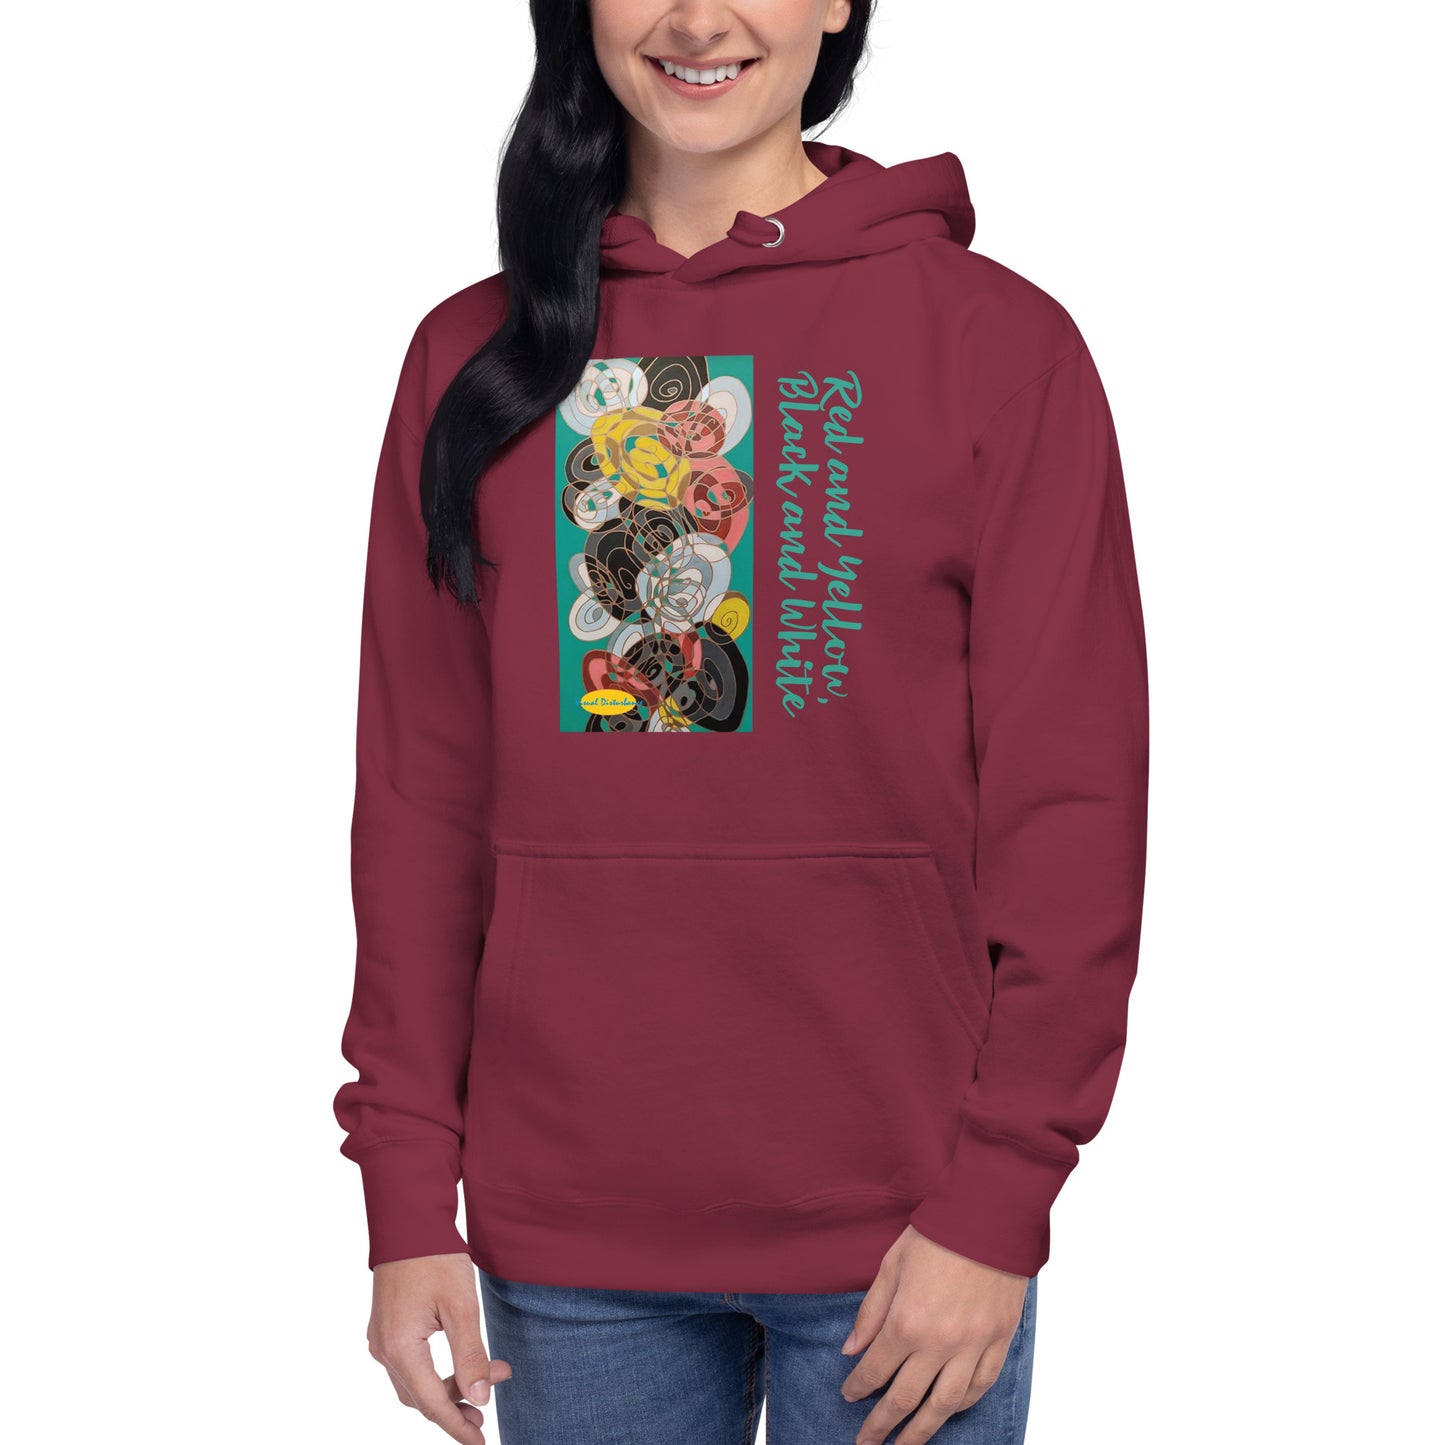 Red and Yellow, Black and White Unisex Hoodie